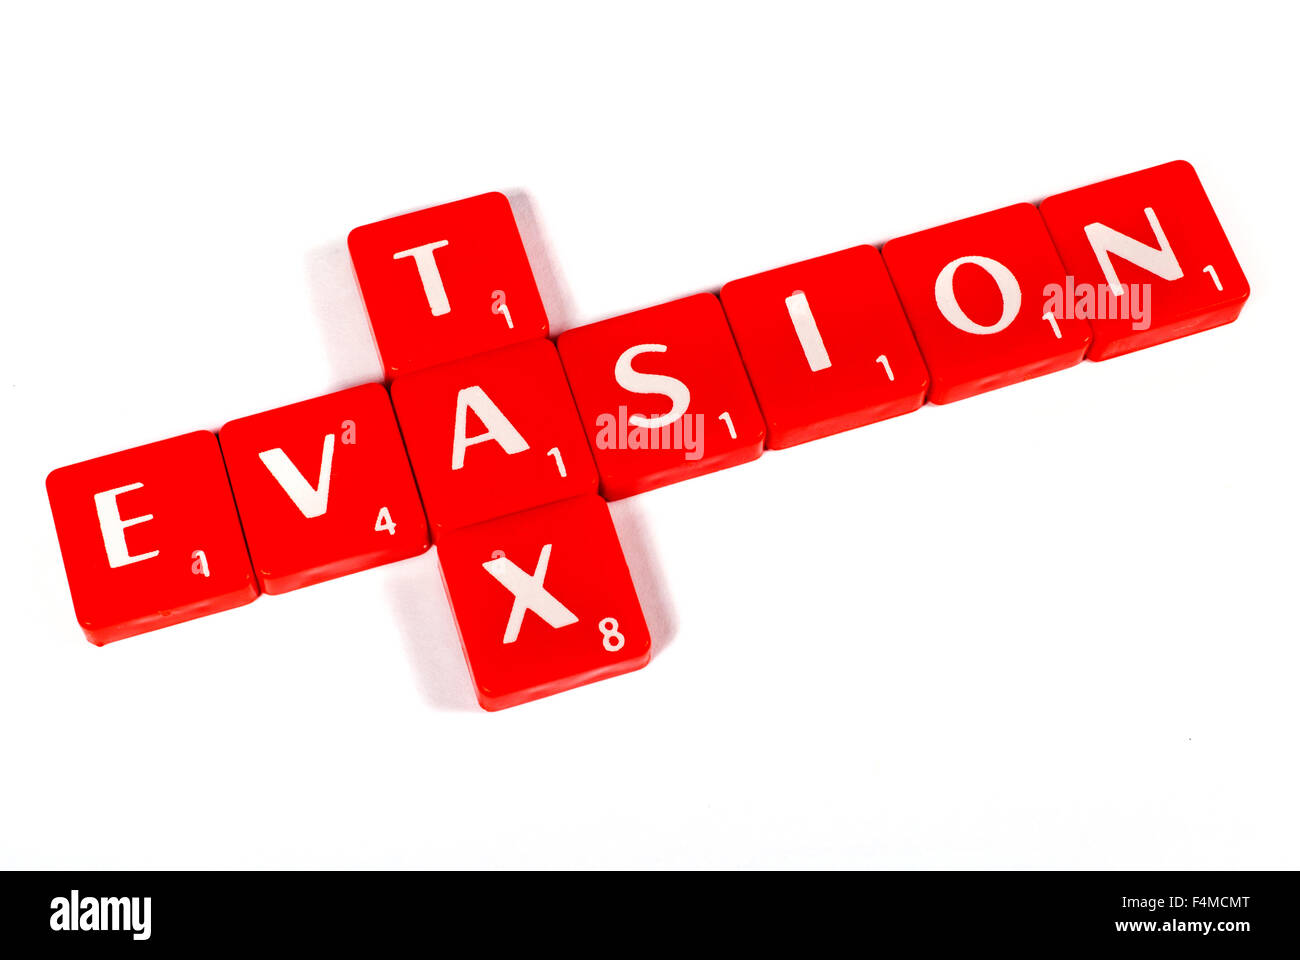 TAX EVASION spelt out with red lettered tiles over a white background. Stock Photo